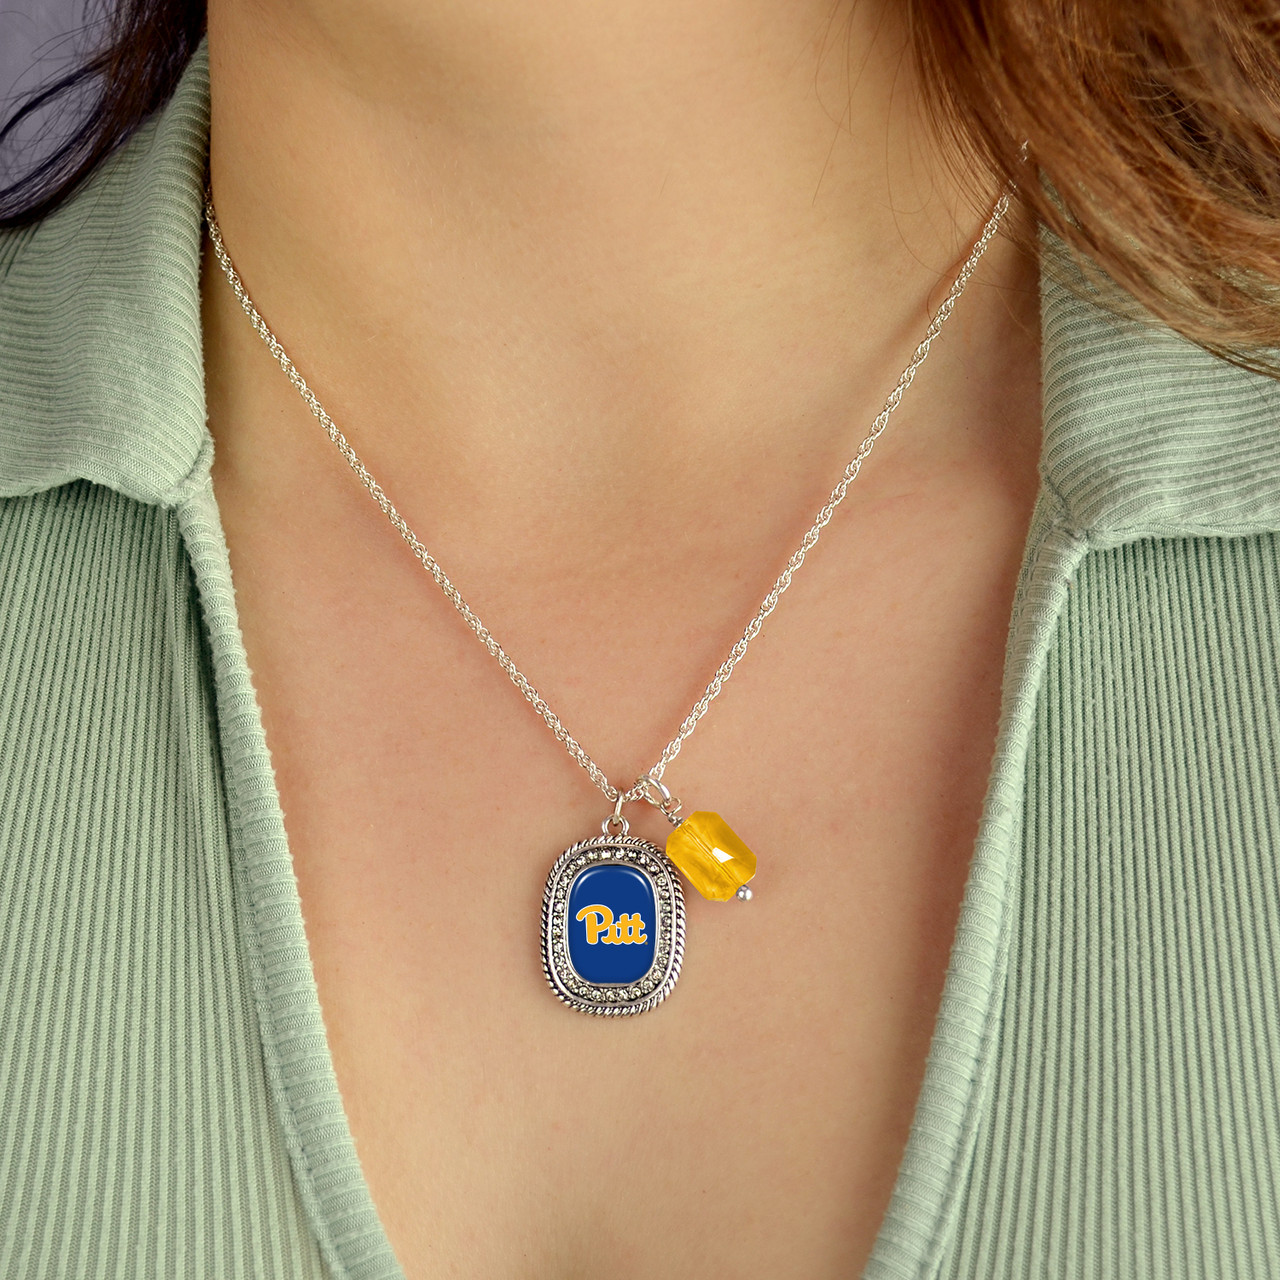 Pittsburgh Panthers Necklace - Madison